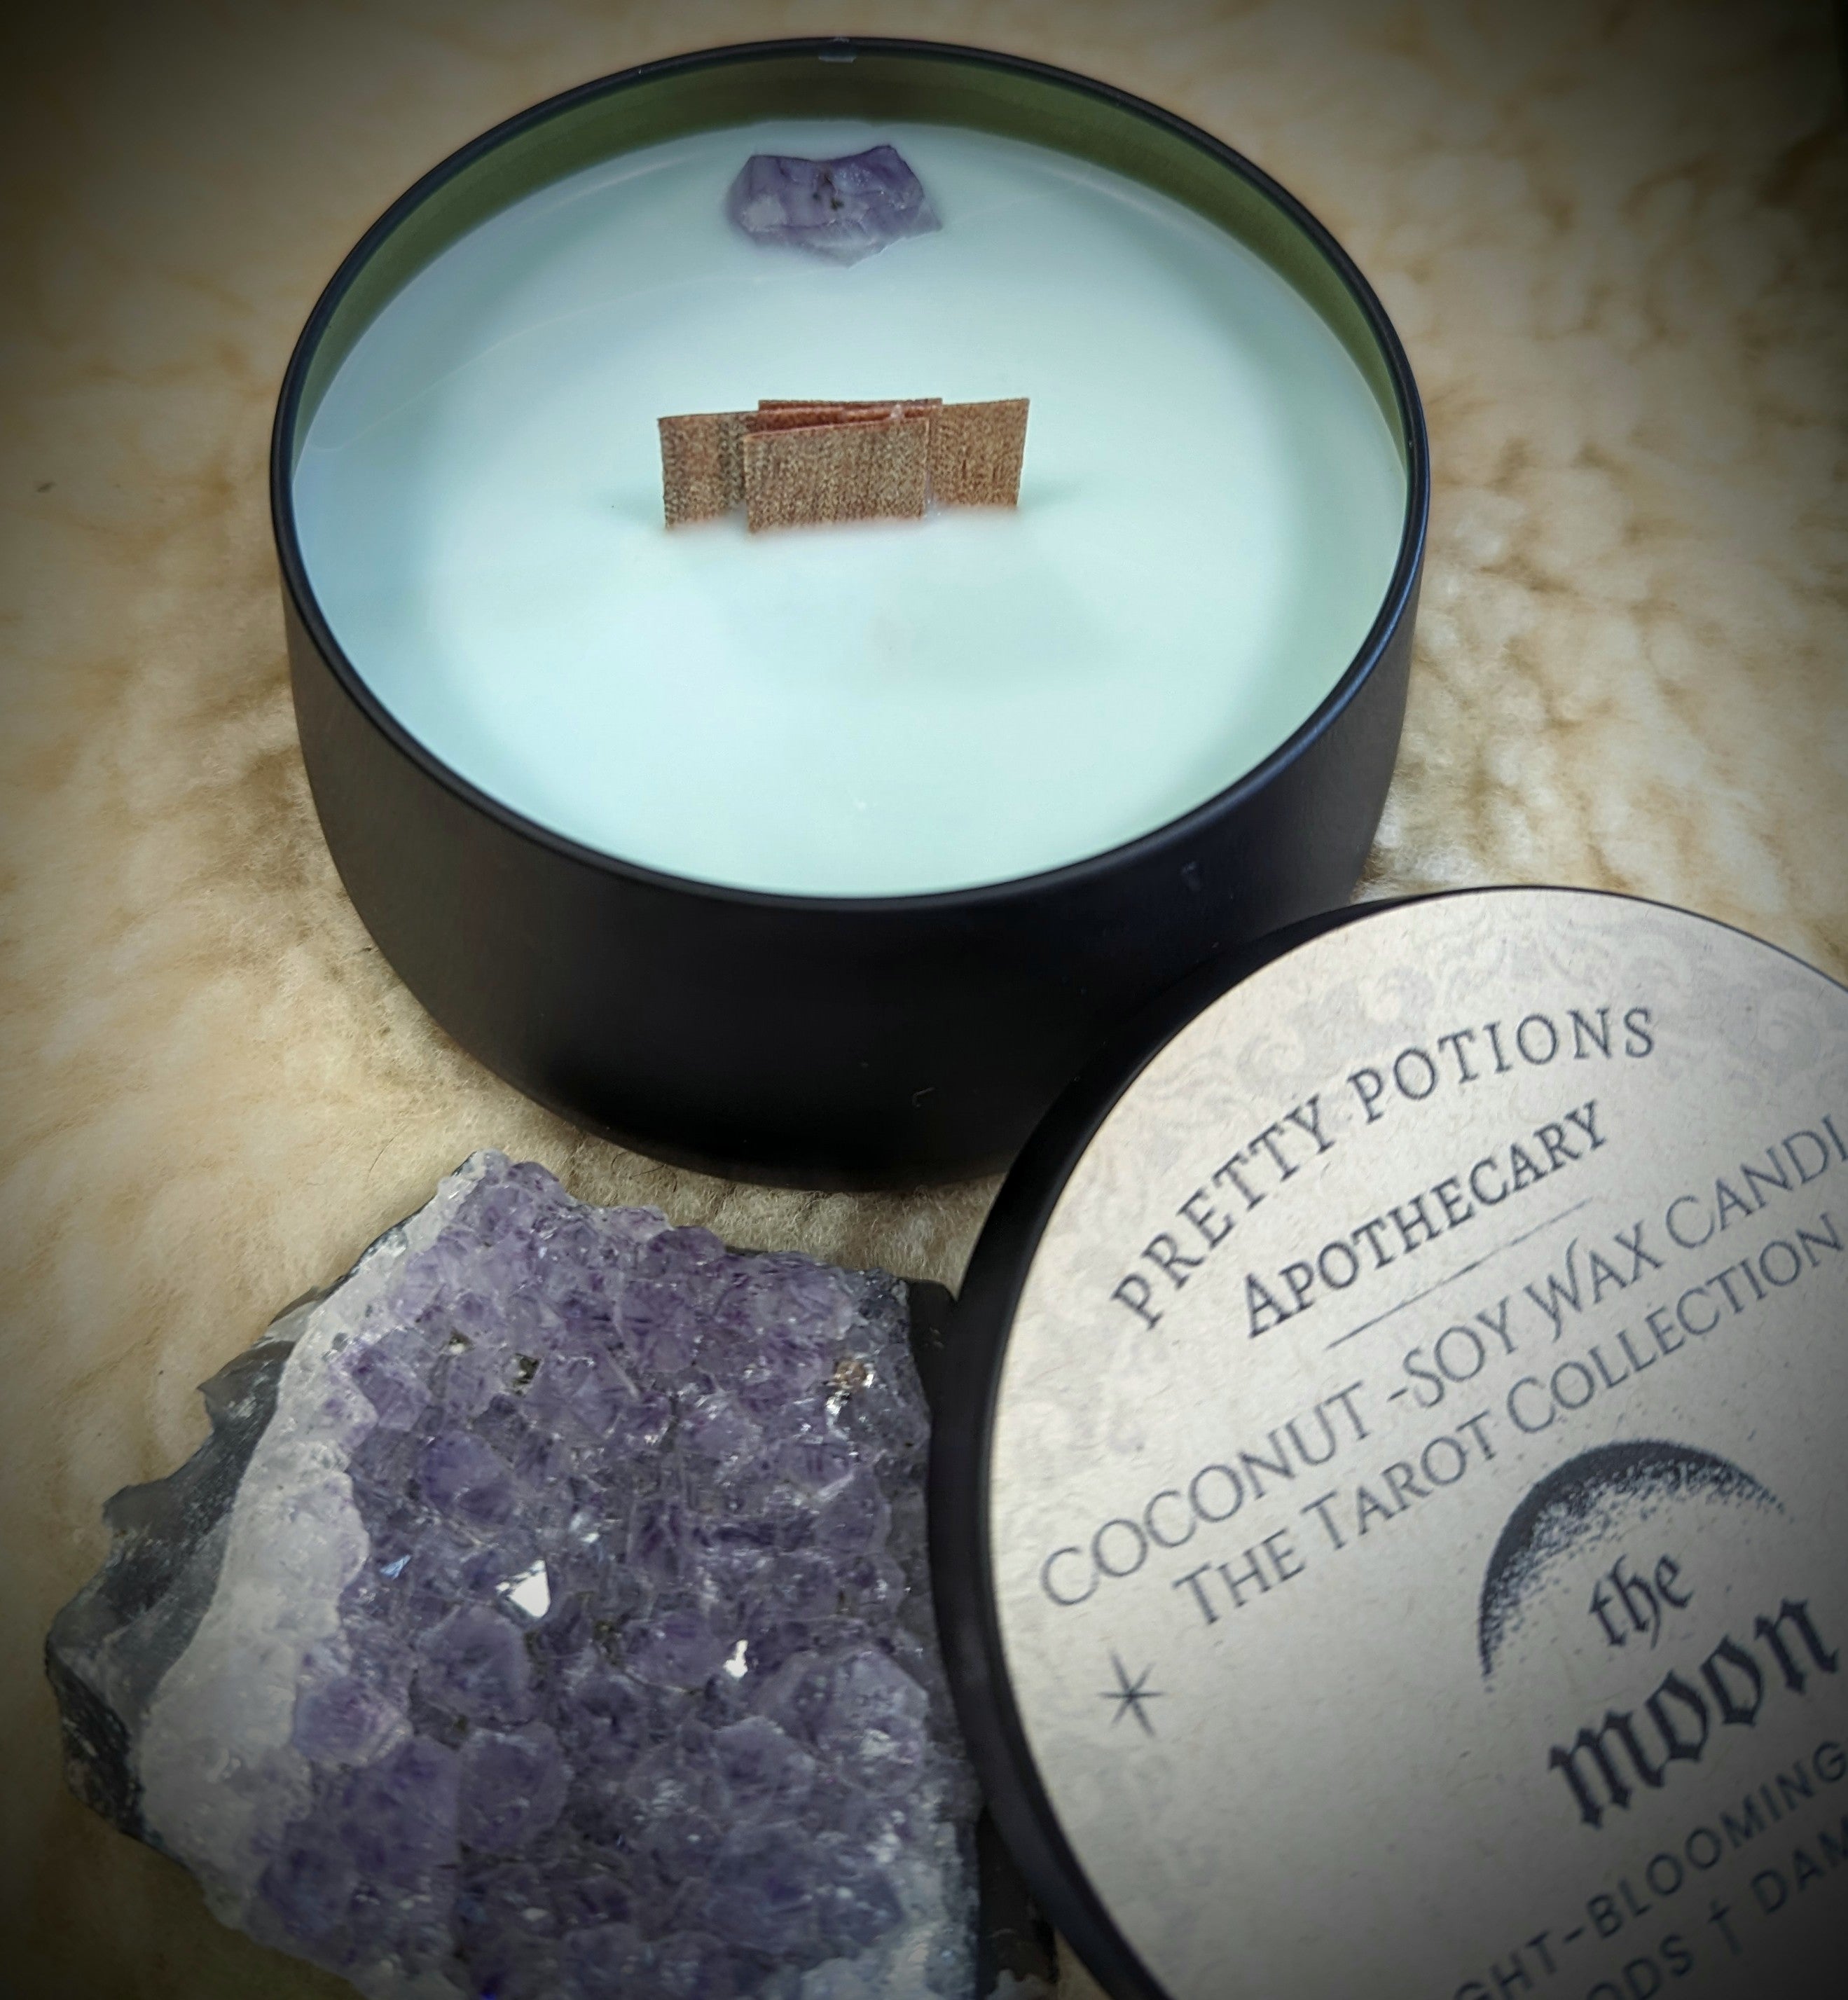 THE MOON Tarot Collection Candle